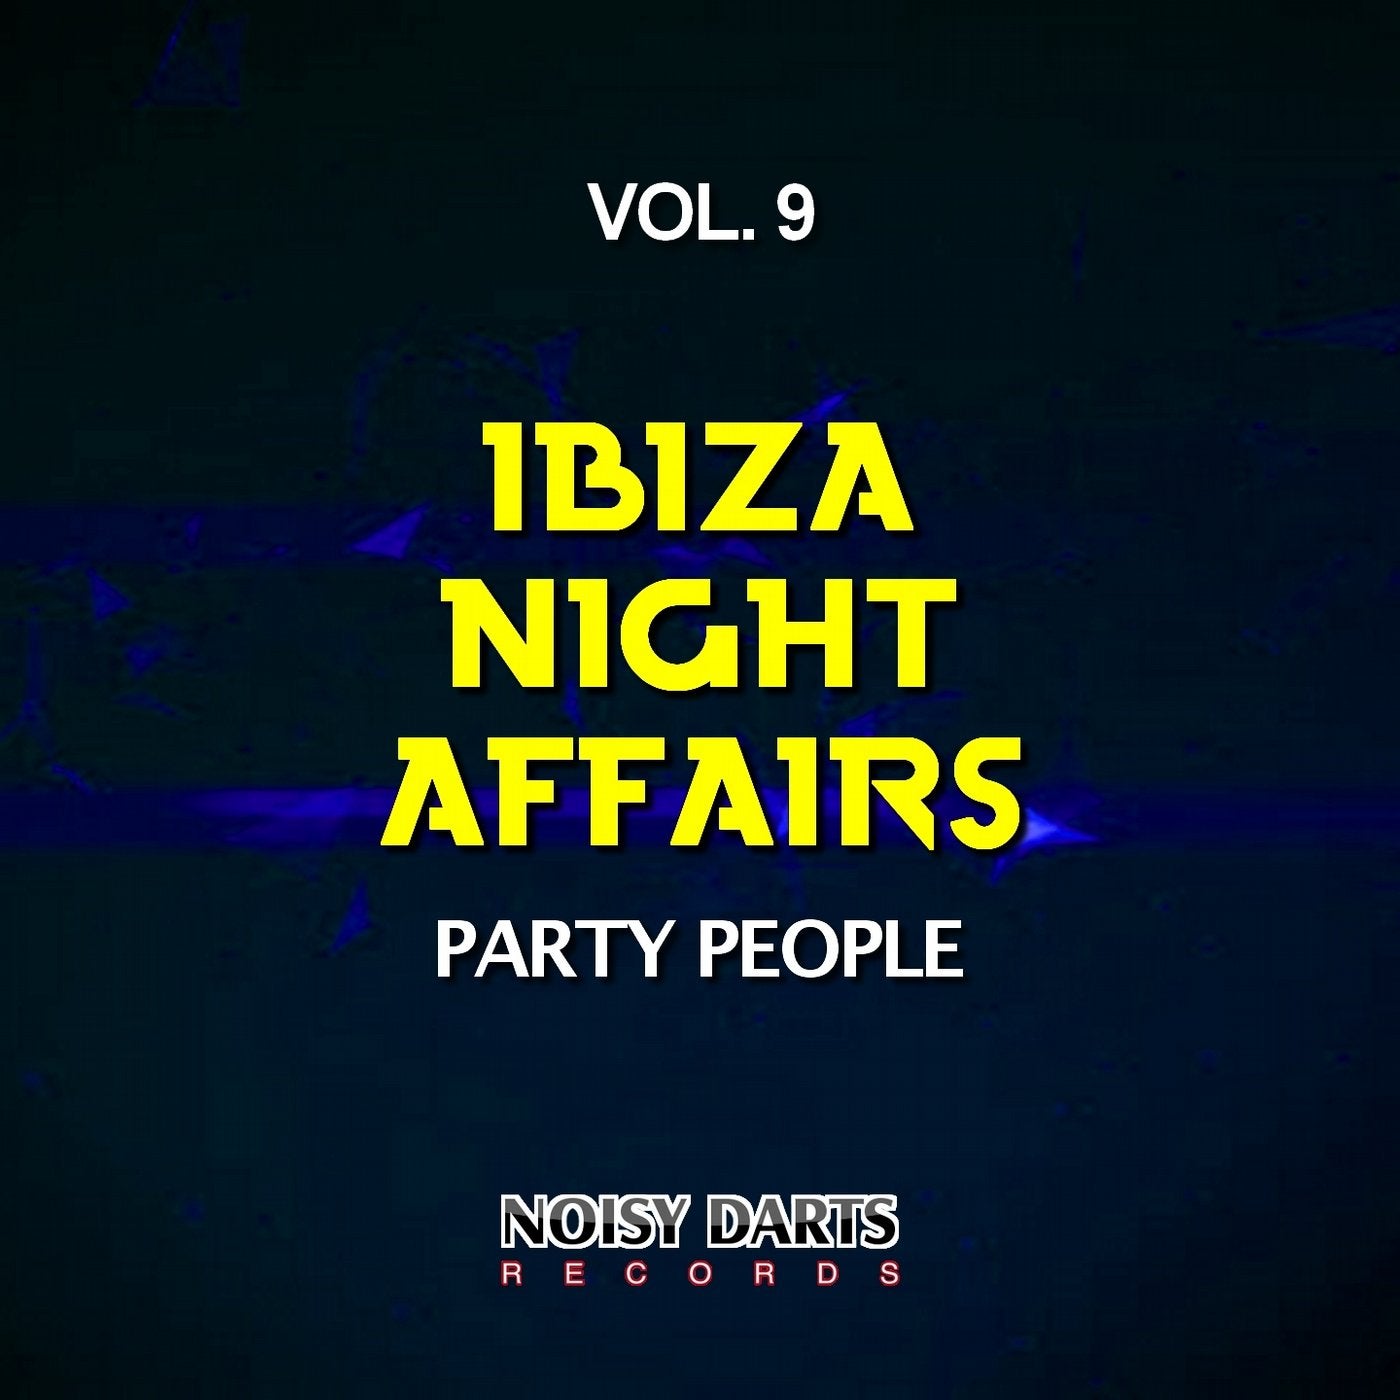 Ibiza Night Affairs, Vol. 9 (Party People)